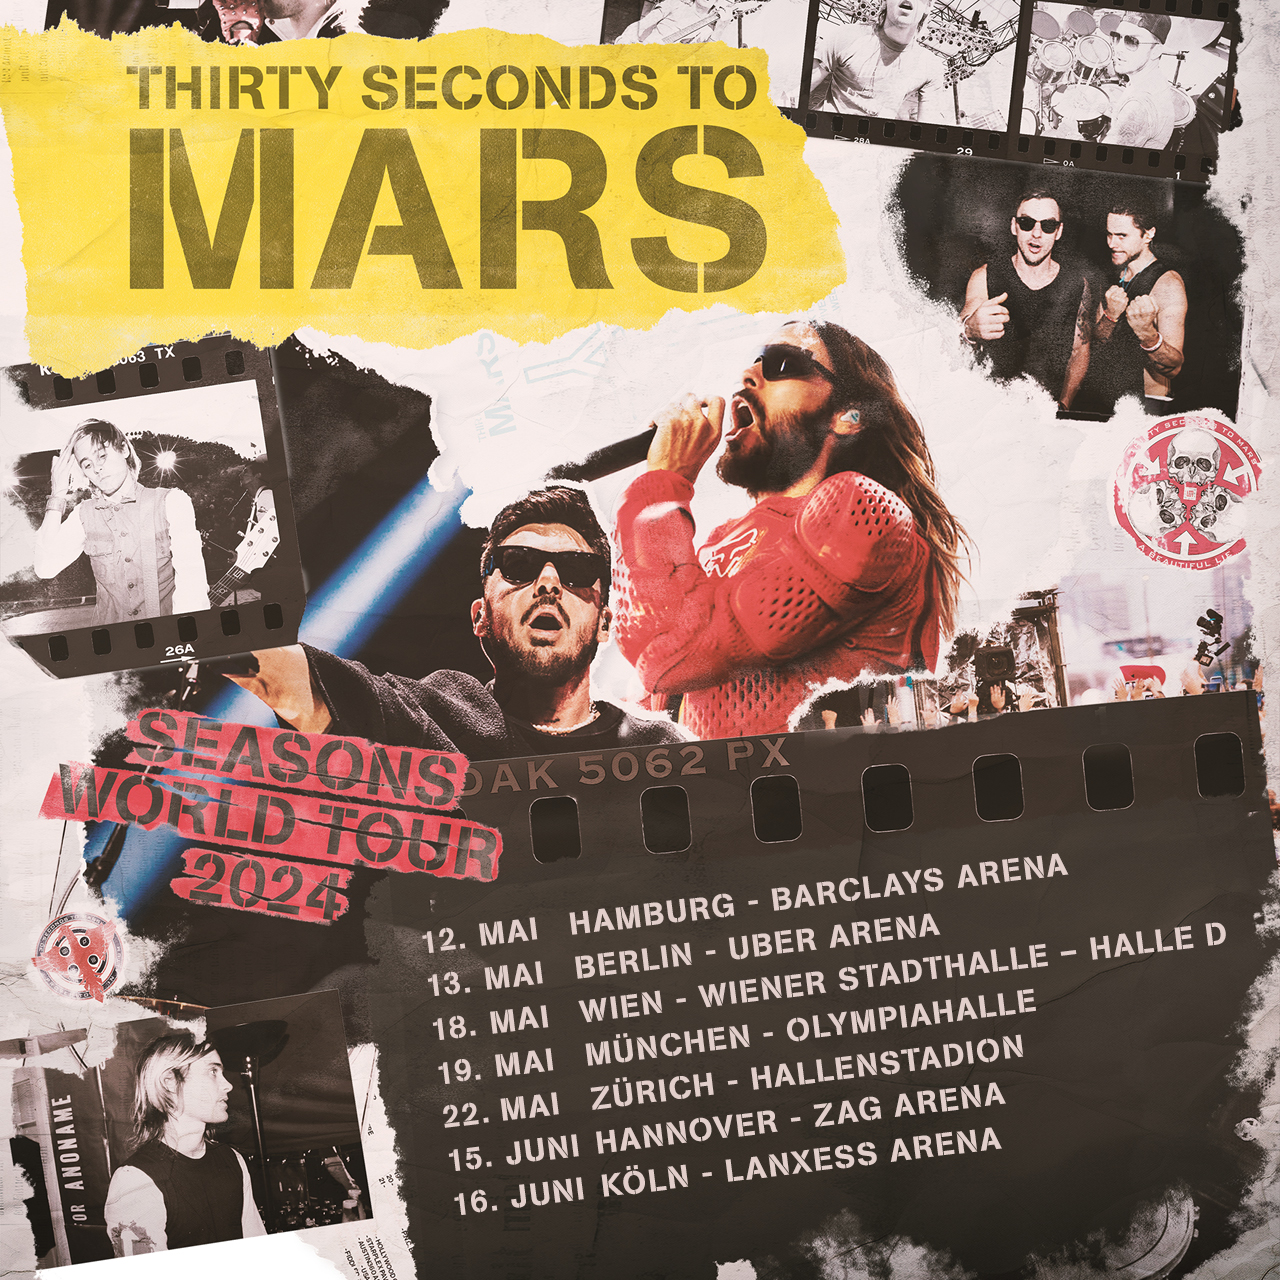 Thirty Seconds To Mars - Seasons in der Lanxess Arena Tickets